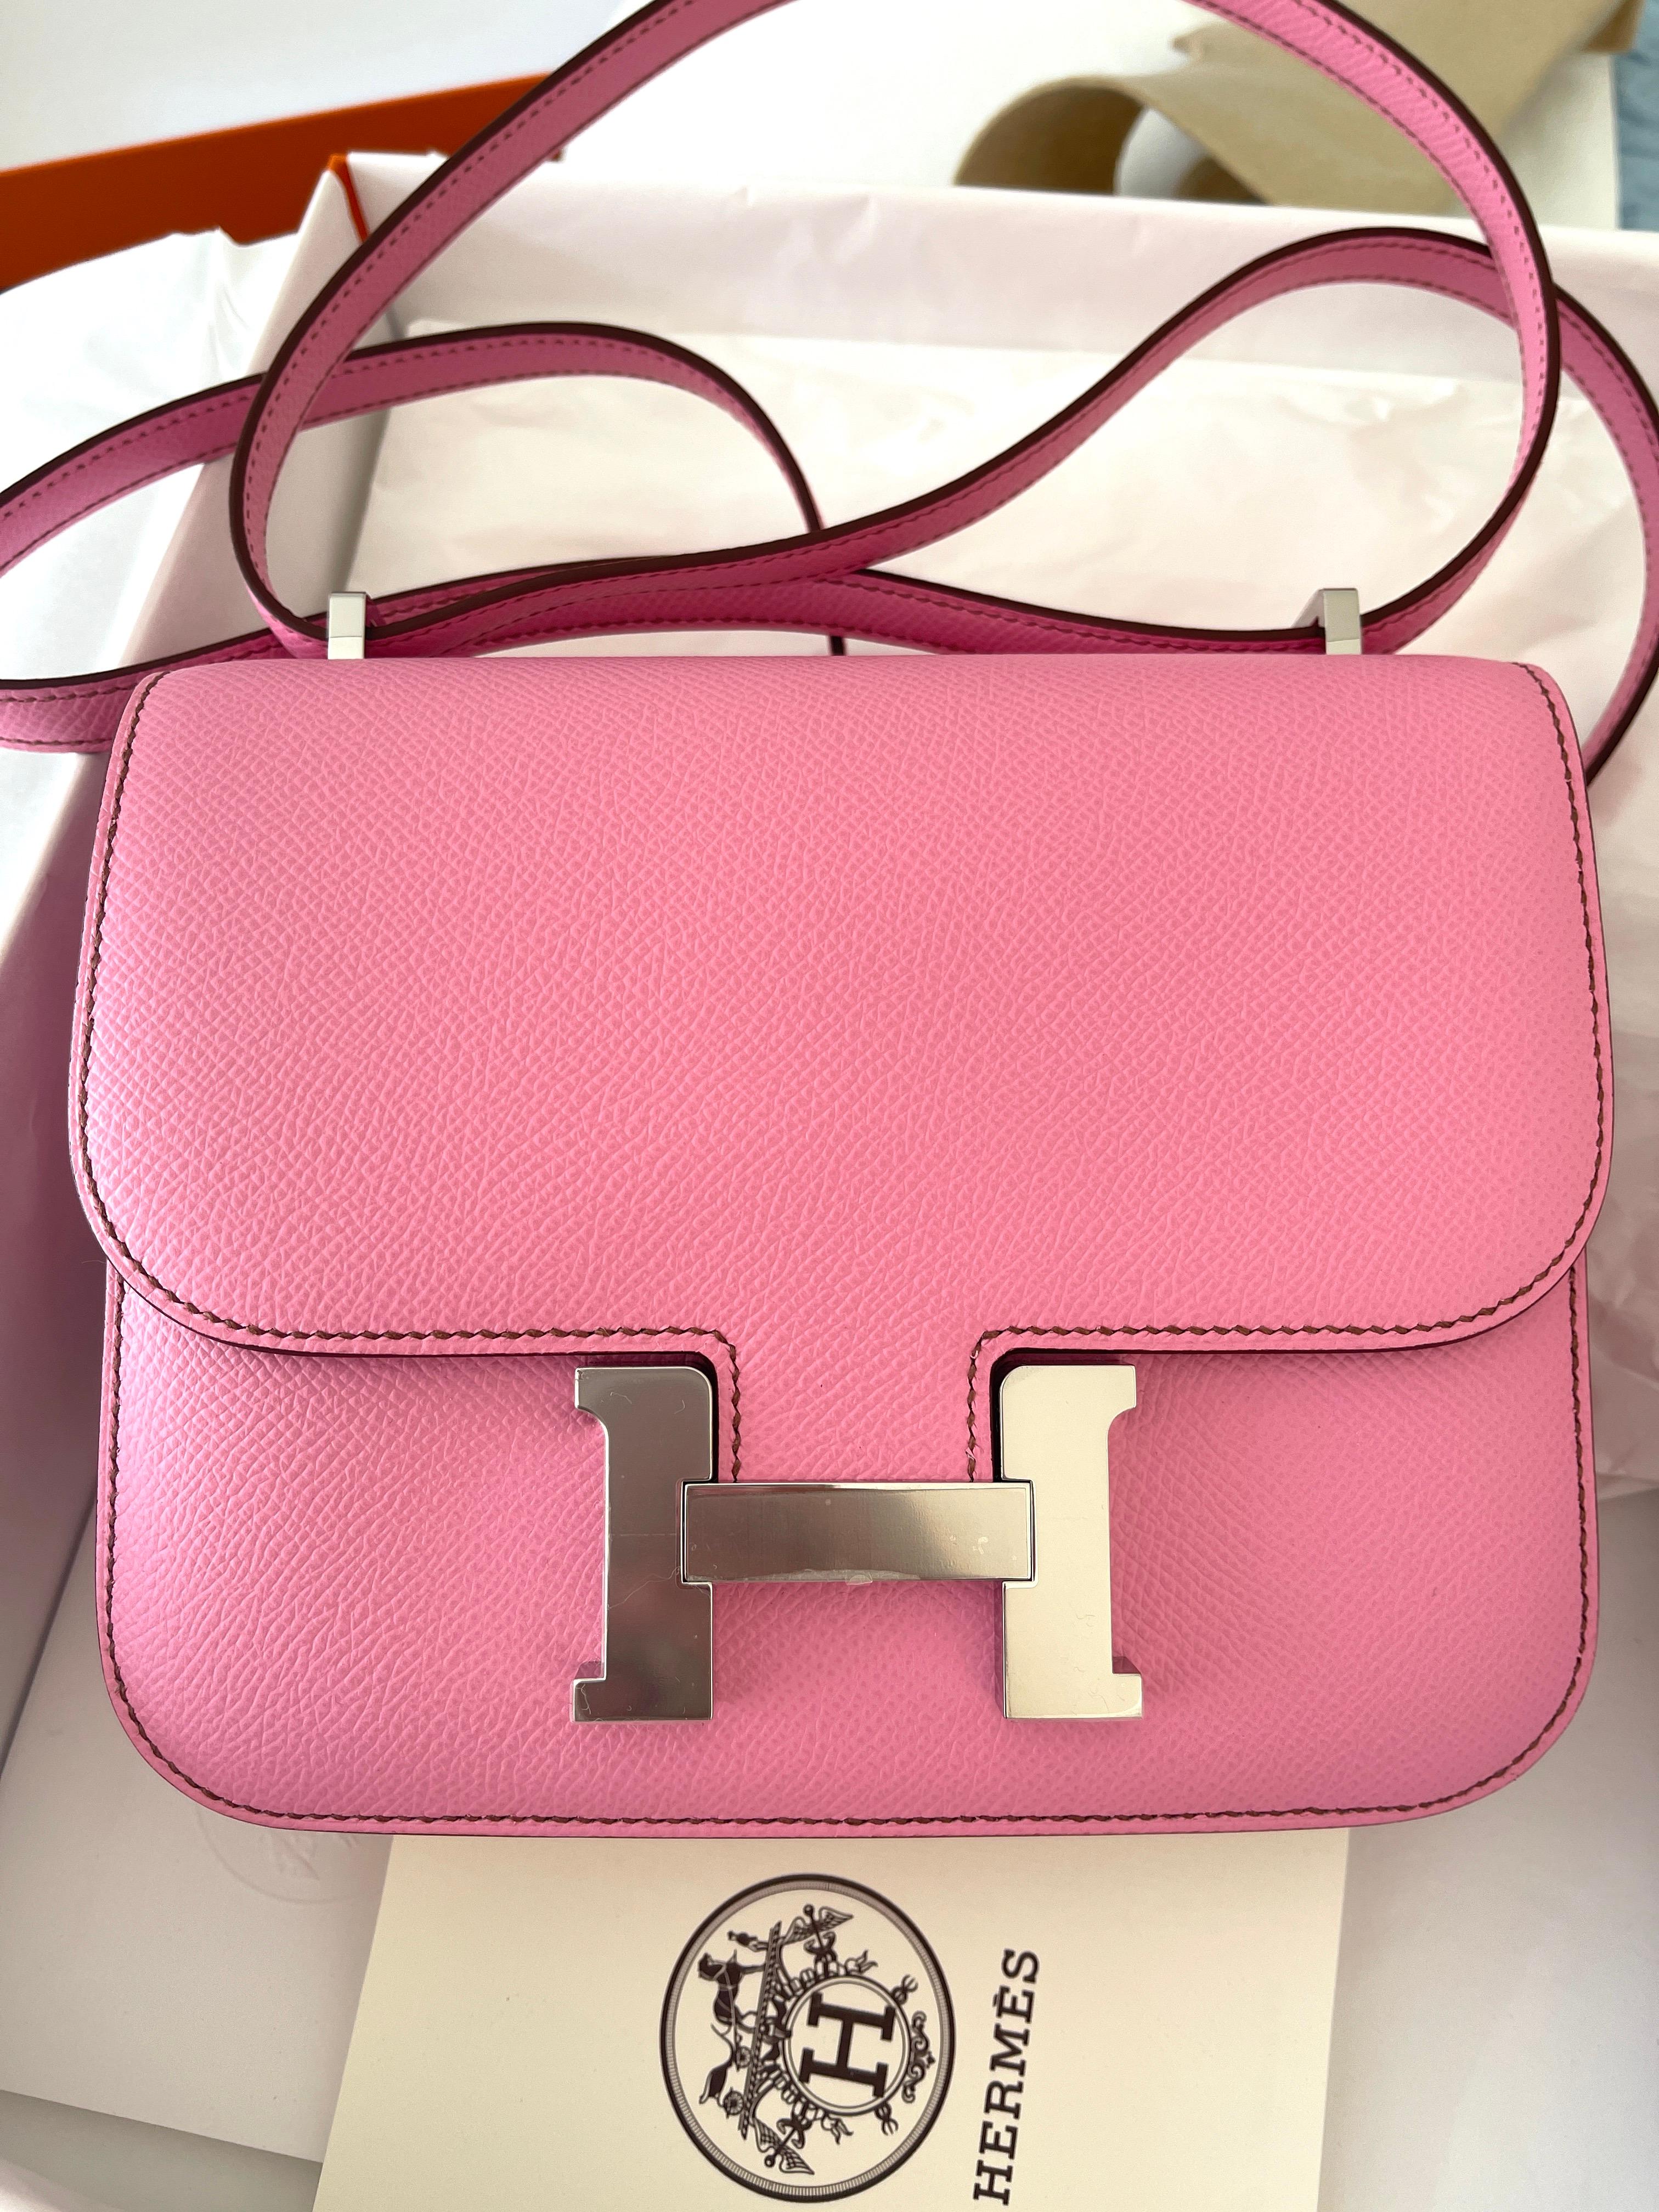 
Hermes Constance 18cm Mini
Bubblegum the most desired pink from Hermes, and the most limited

This Constance is in Bubblegum epsom leather with palladium hardware and has contrast stitching, a metal 